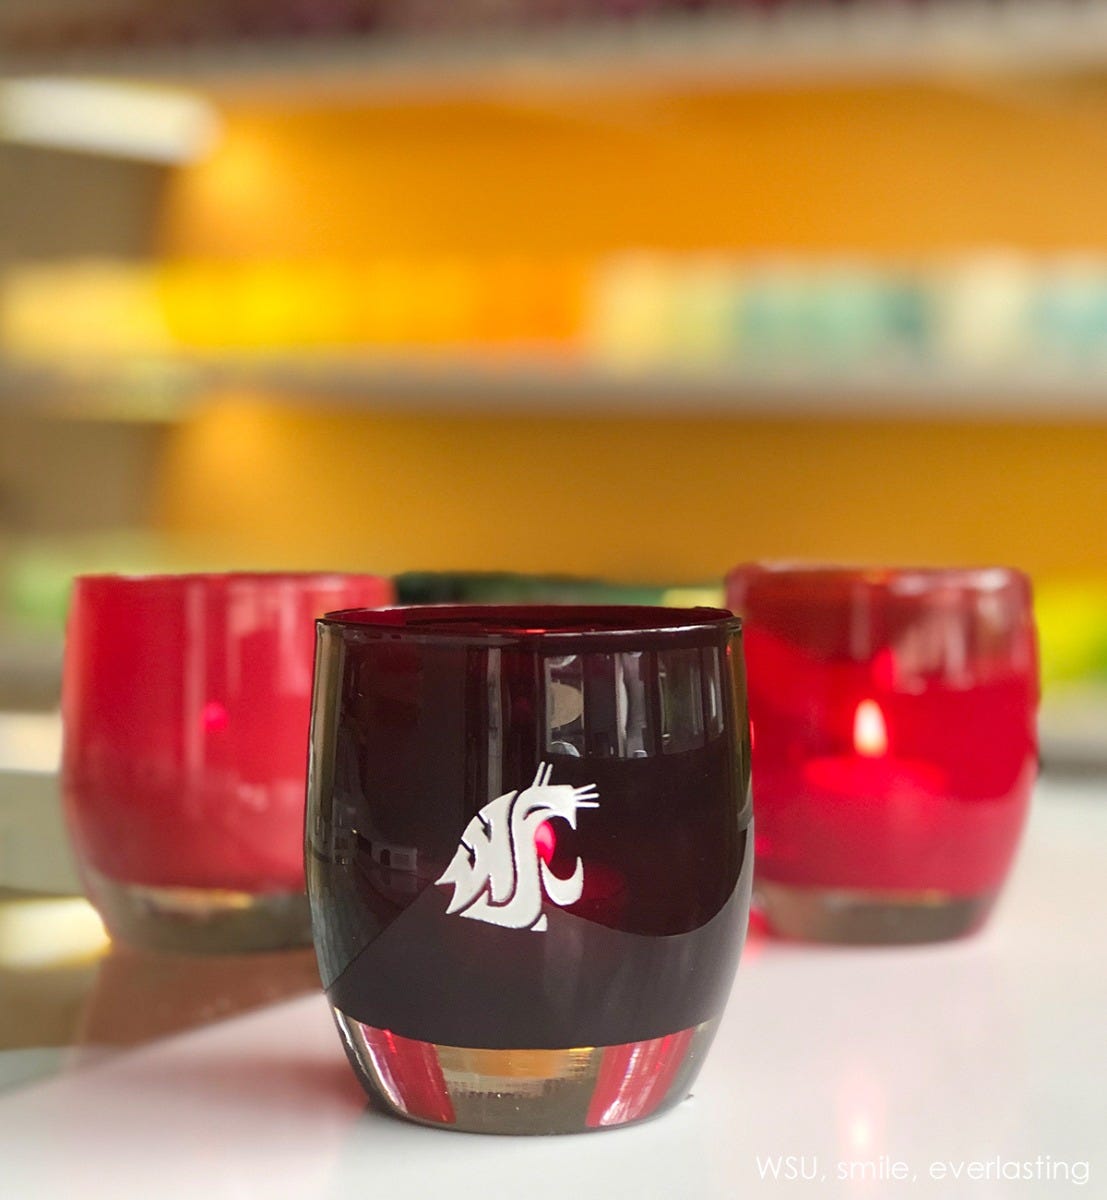 wsu, crimson with sandblasted washington state university etching hand painted in silver, hand-blown glass votive candle holder. Paired with everlasting and smile on a white and clear table.